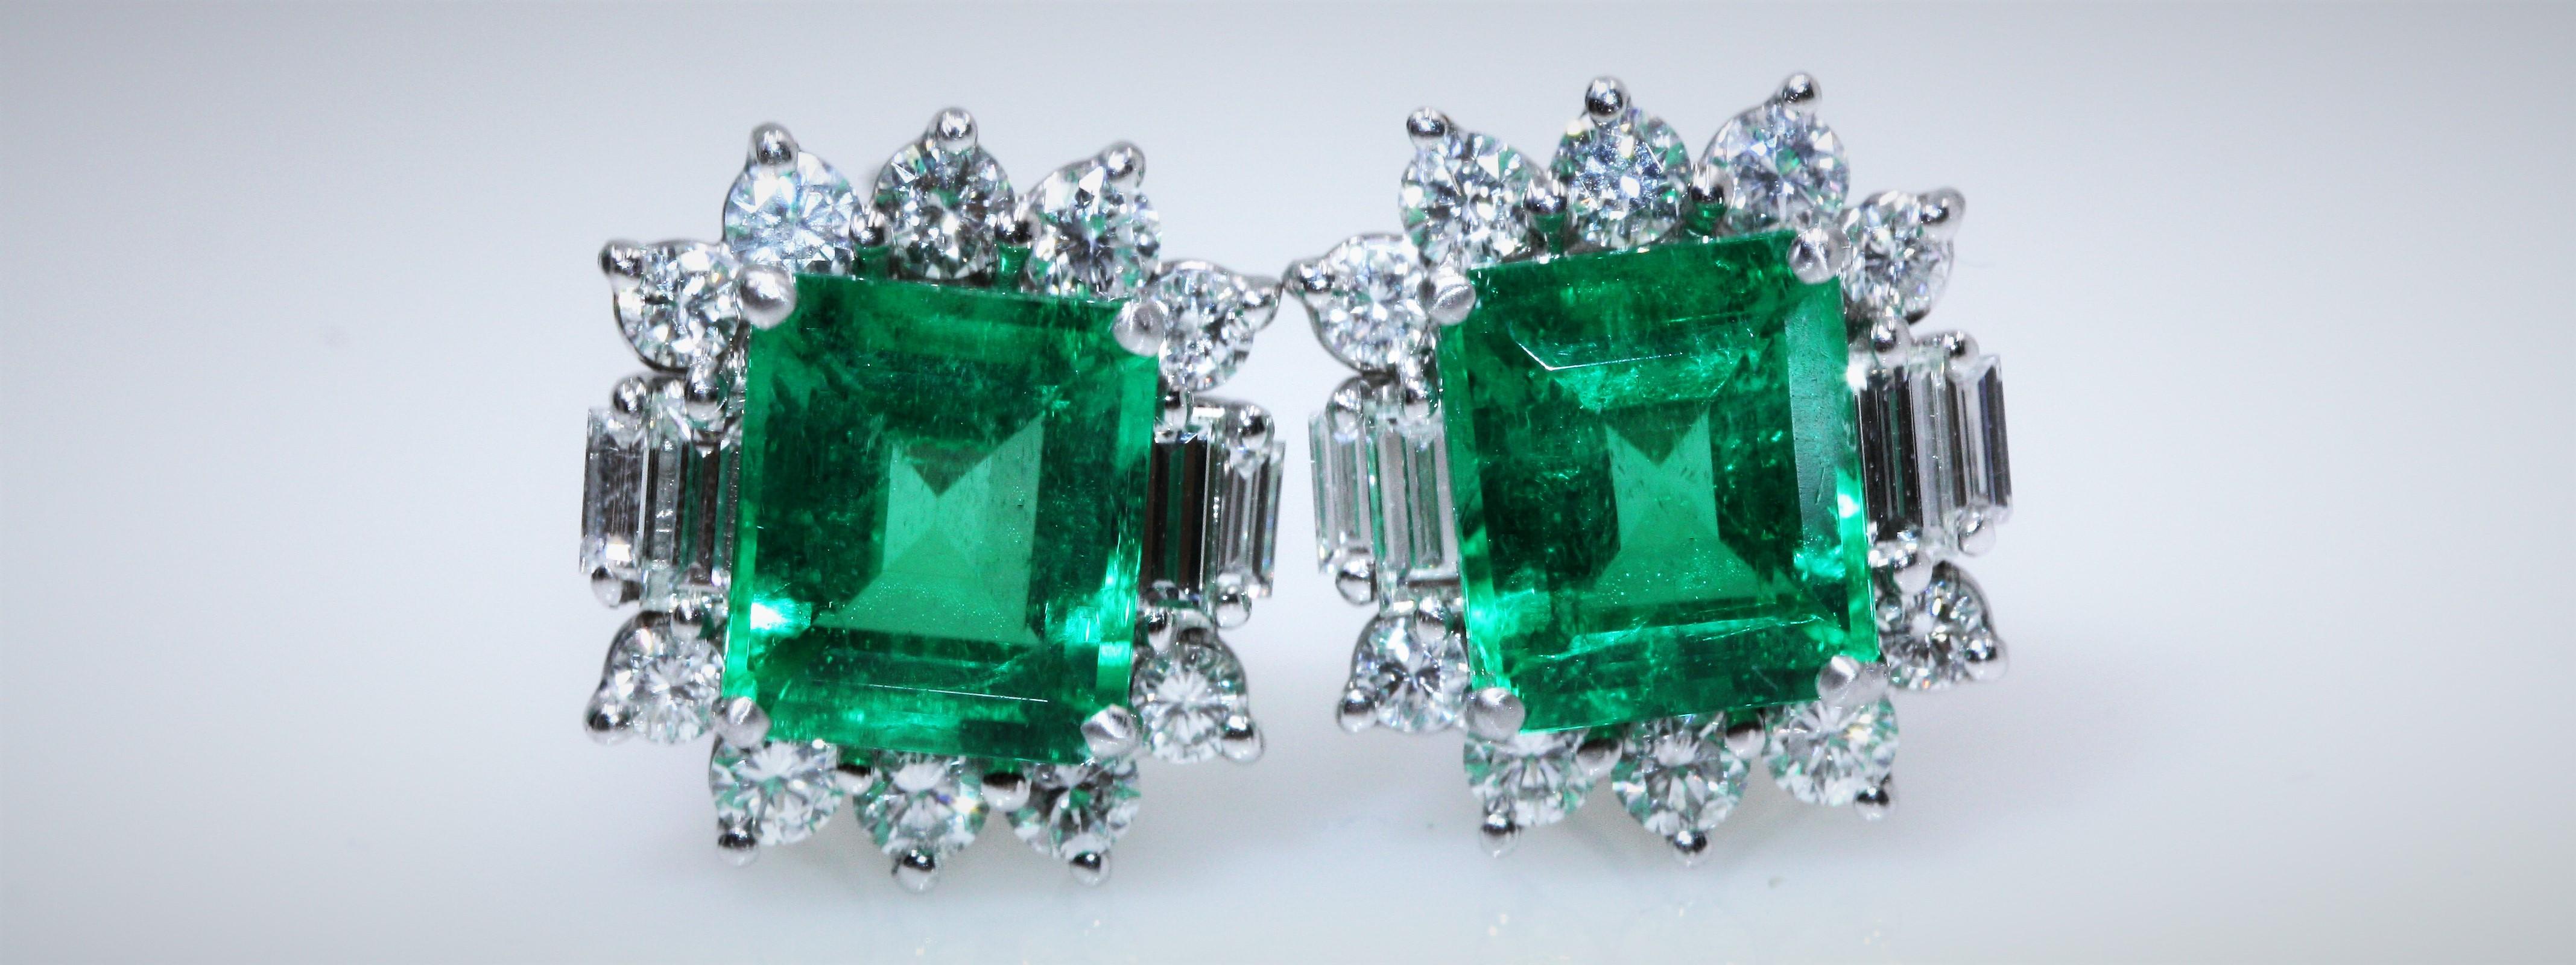 Columbia Emerald White Gold Diamond Earrings, Insignificant Oil For Sale 3